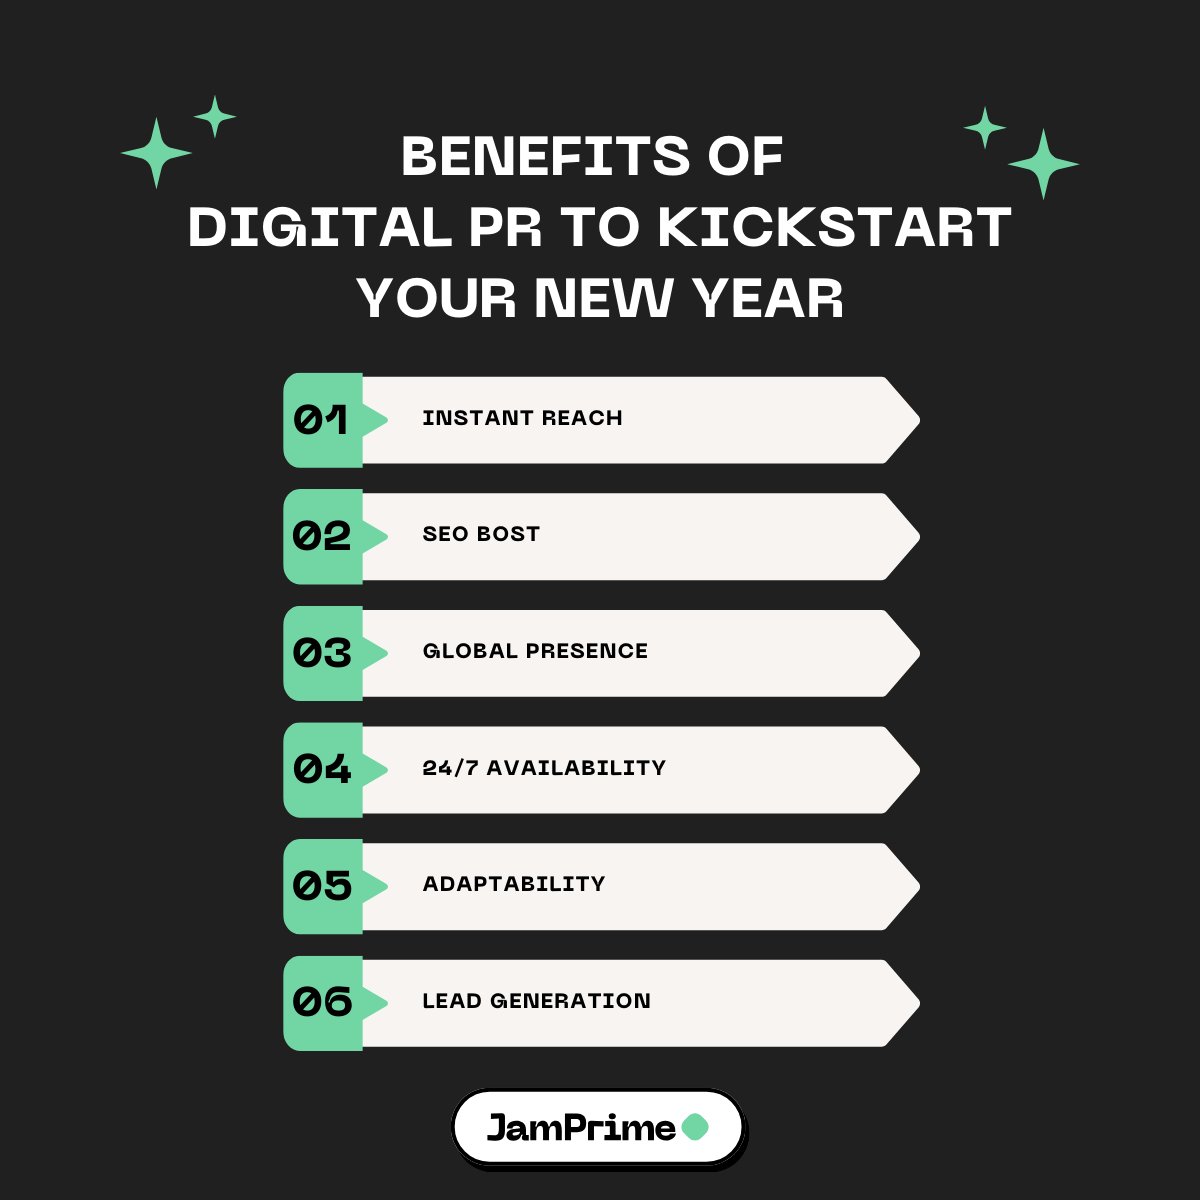 👇 Fancy these #DigitalPR benefits for your own business? We make make that happen.

Instant global reach, SEO boosts, 24/7 availability... they could all be yours. We can make the next year a success together. 🤝

#JamPrime #DigitalPR #PublicRelations #PRBenefits